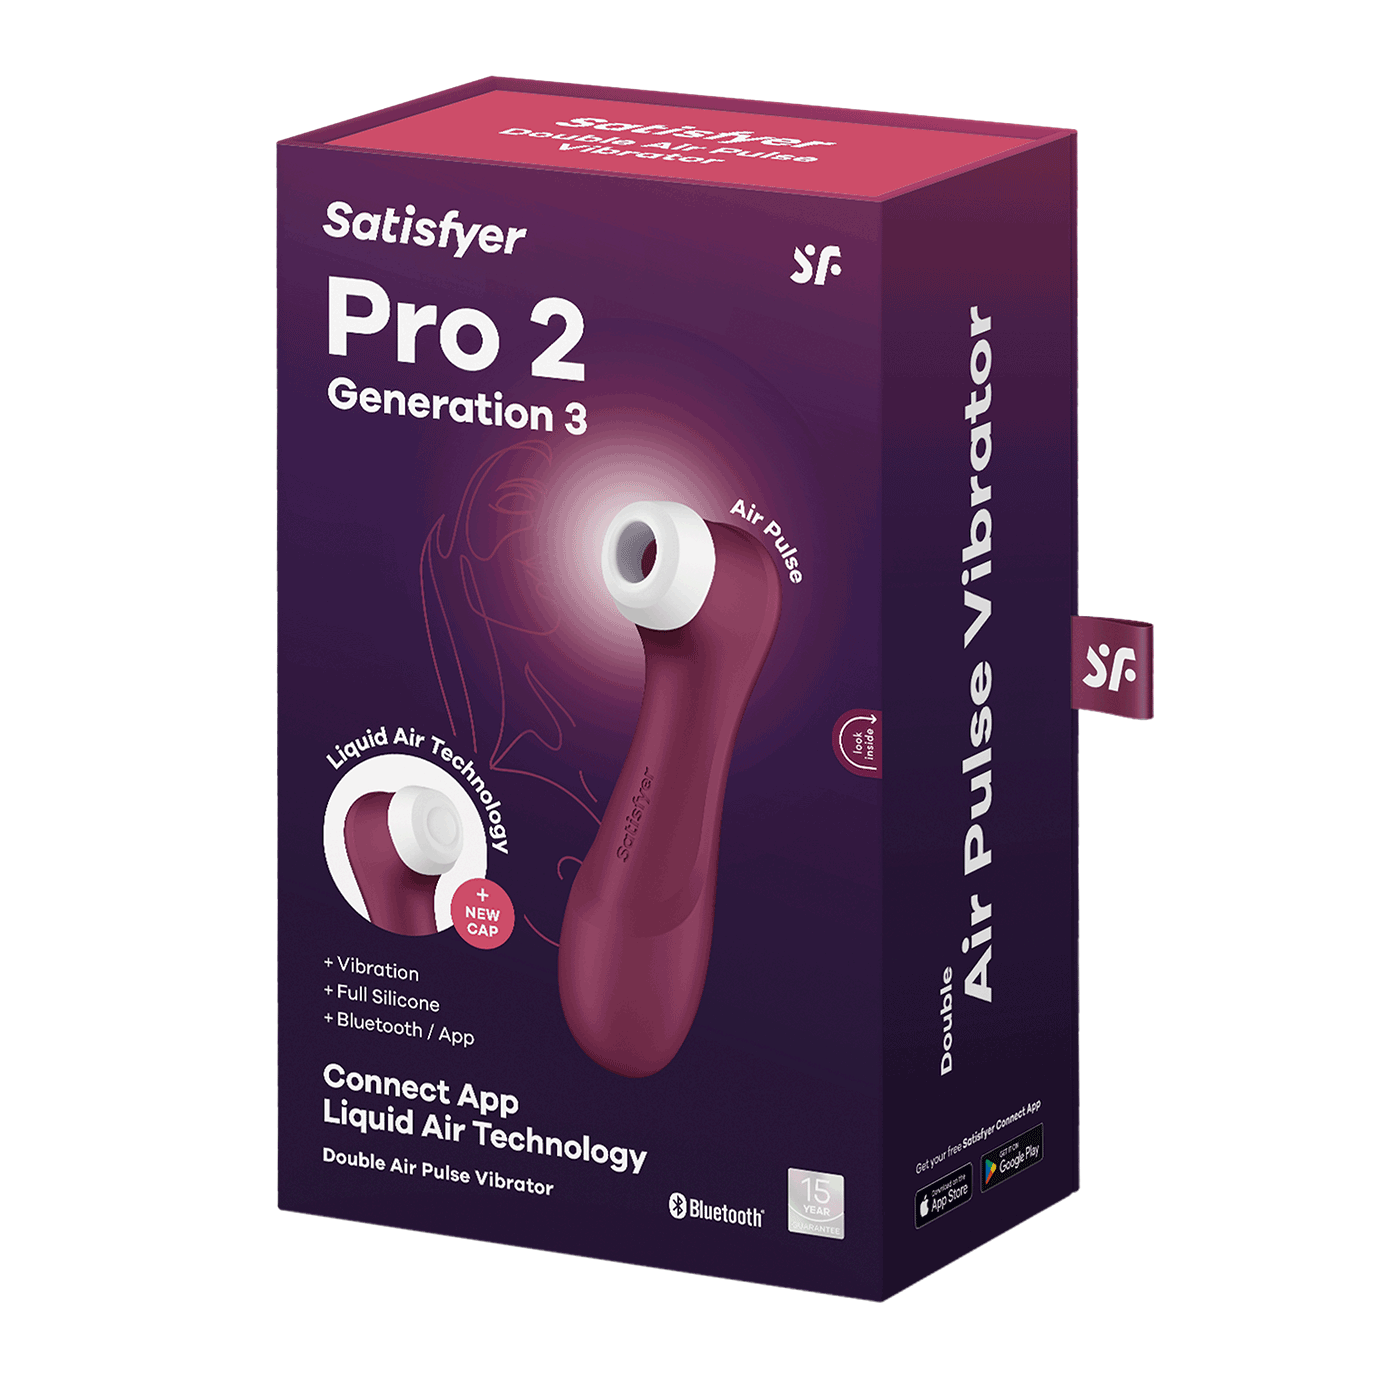 Packaging for the Satisfyer Pro 2 - Generation 3 WITH app control. | Kinkly Shop